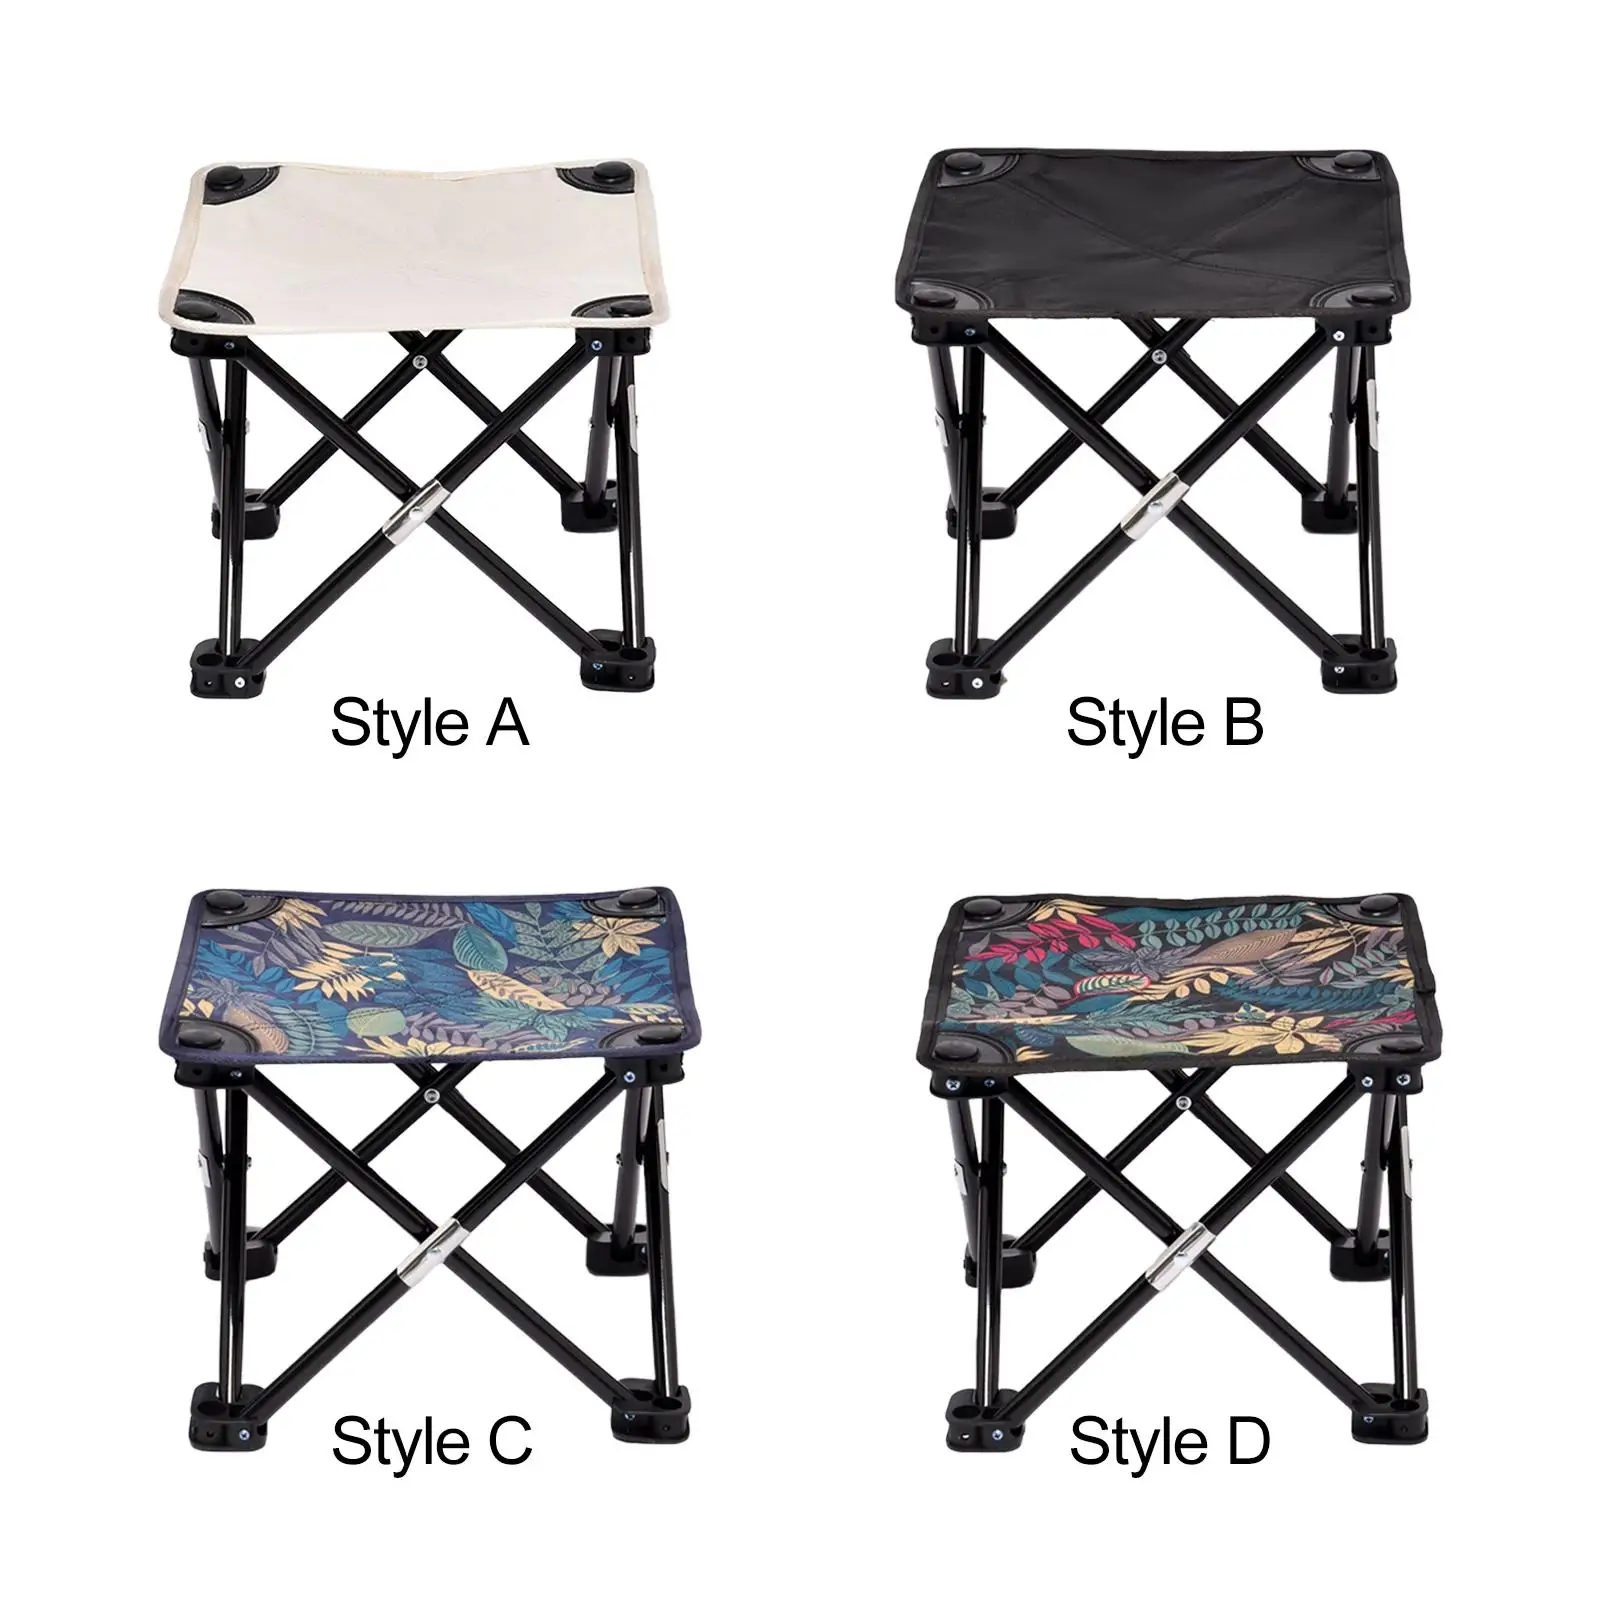 Folding Stool Lounger Chair Ottoman recliner Foot Rest Saddle Chair Fishing Chairs for Lounge Hiking Backpacking Travel Patio